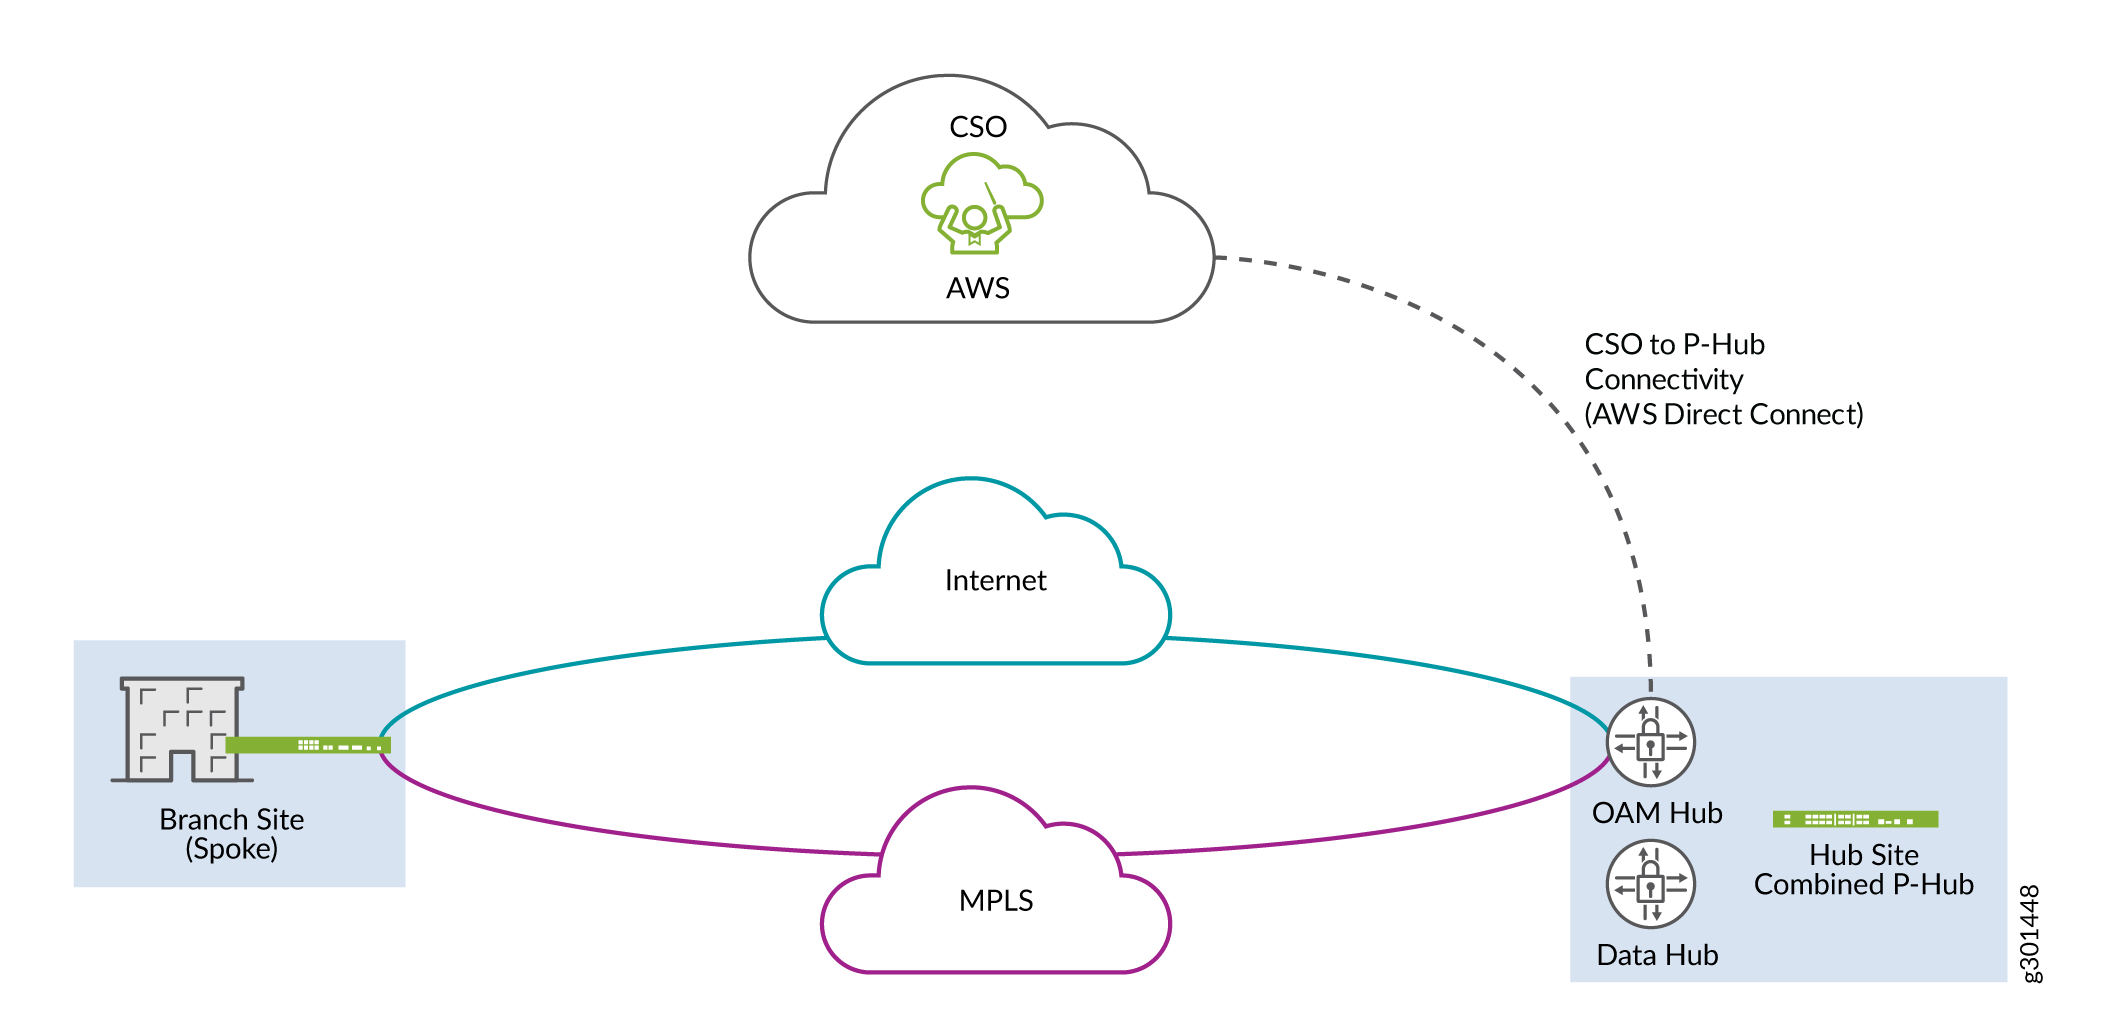 Simplified CSO
SD-WAN Topology (On-Premises Deployment in which CSO is Connected
to Provider Hubs via AWS Direct Connect)